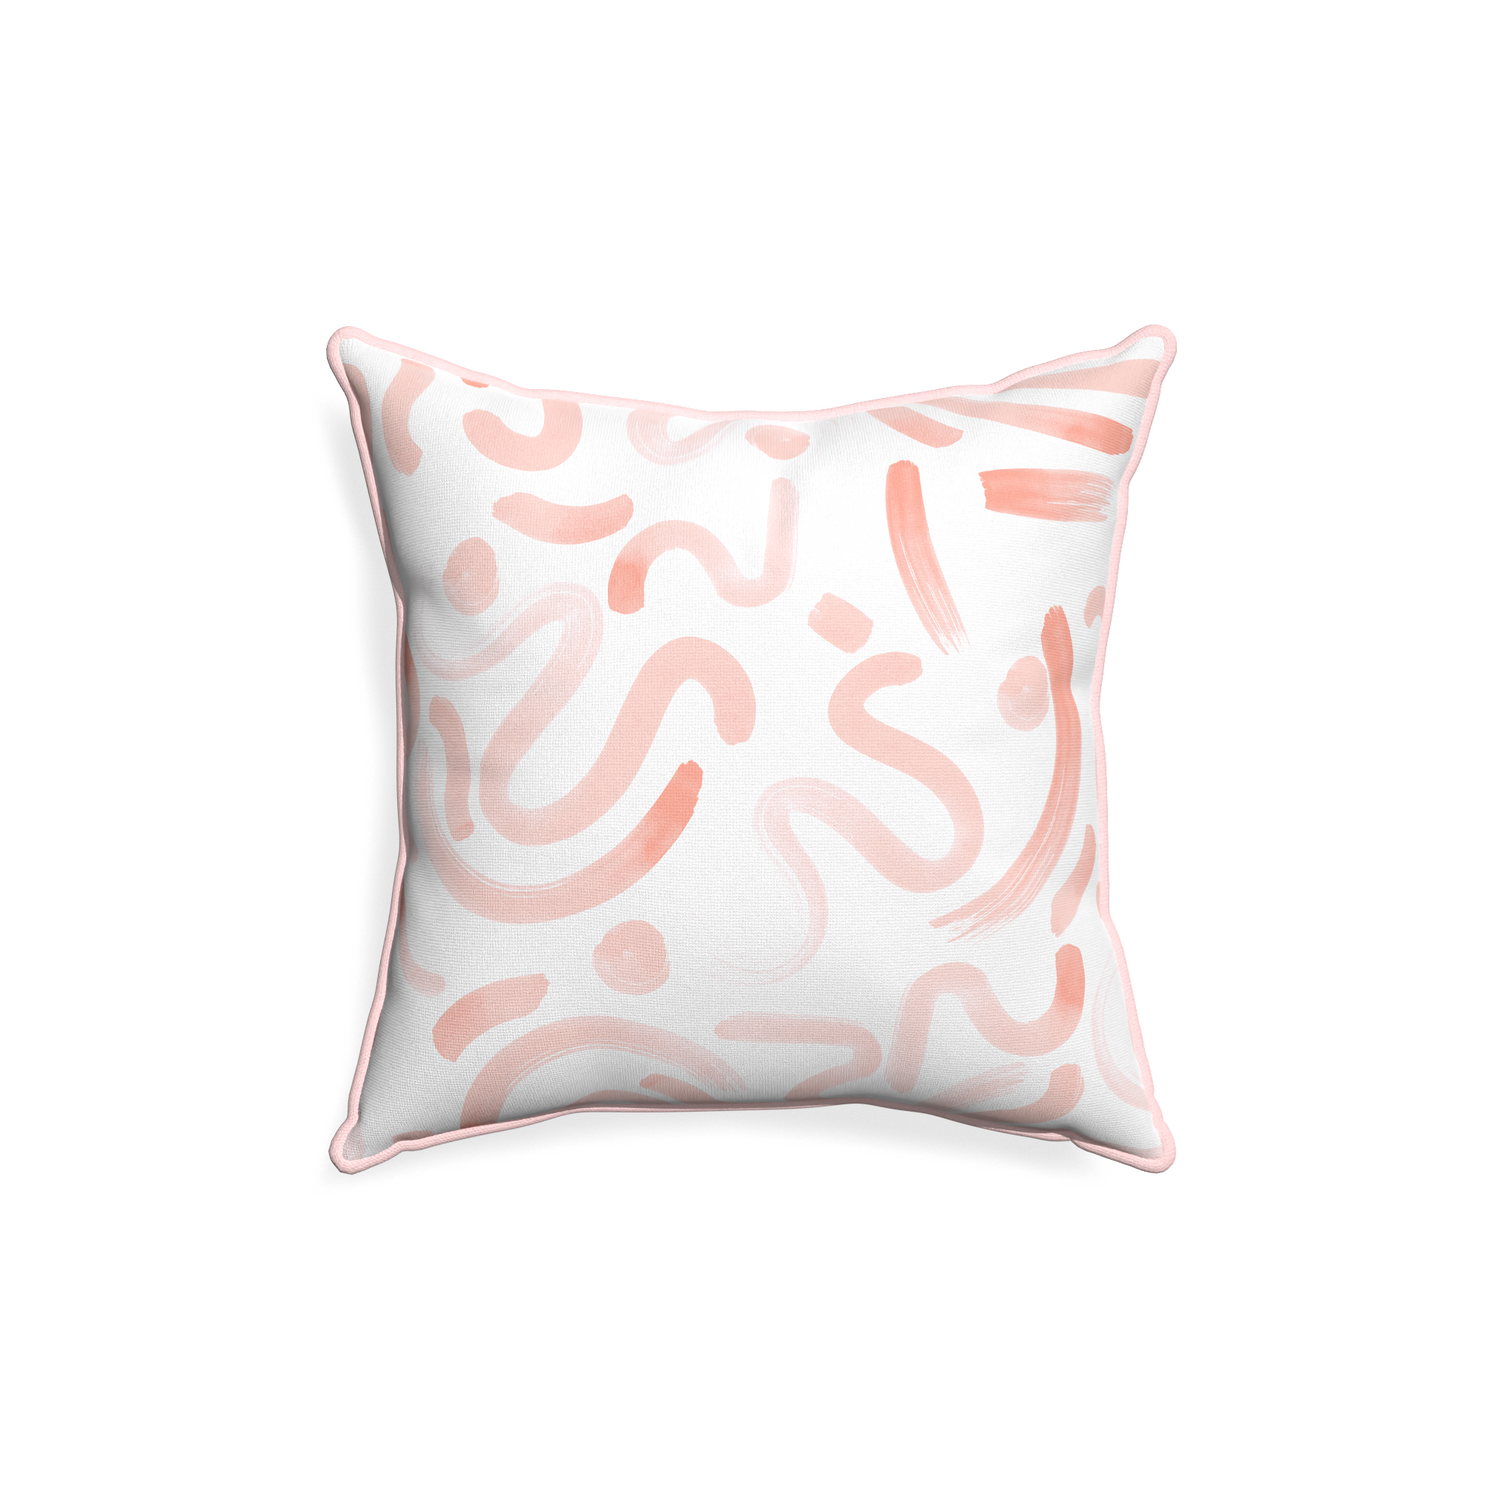 18-square hockney pink custom pink graphicpillow with petal piping on white background